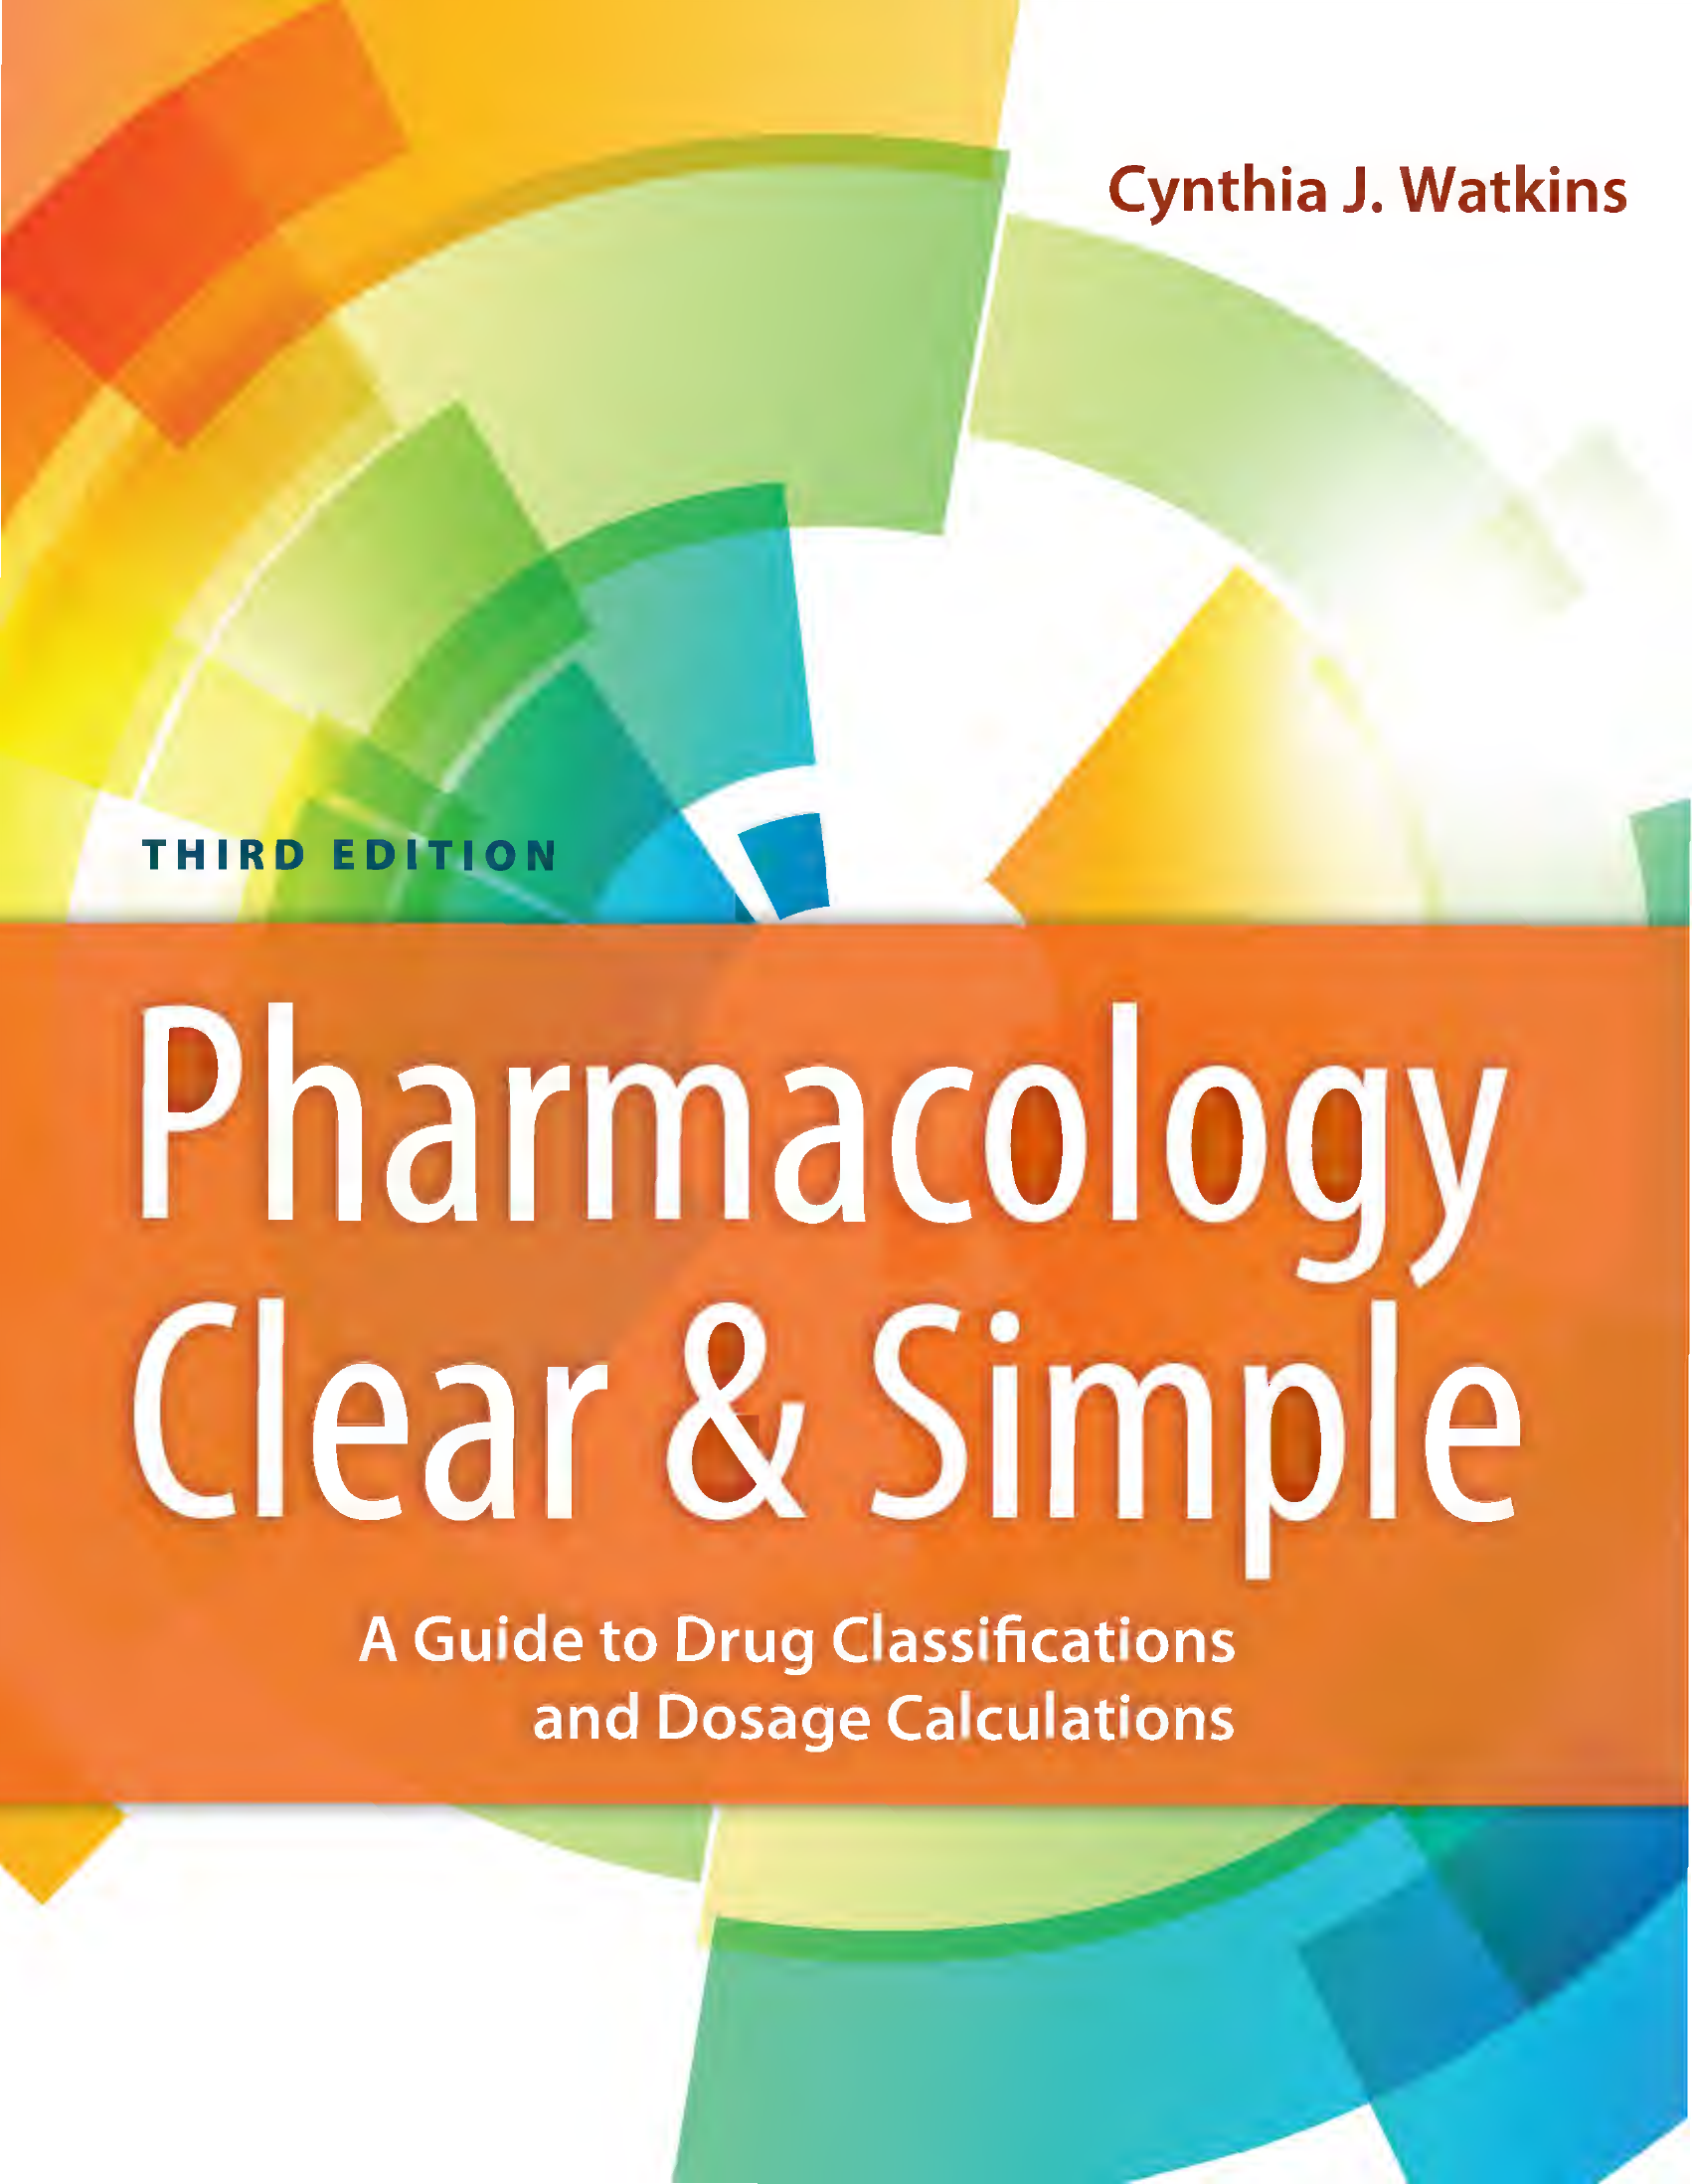 Pharmacology Guide to Drug Classifications and Dosage Calculations